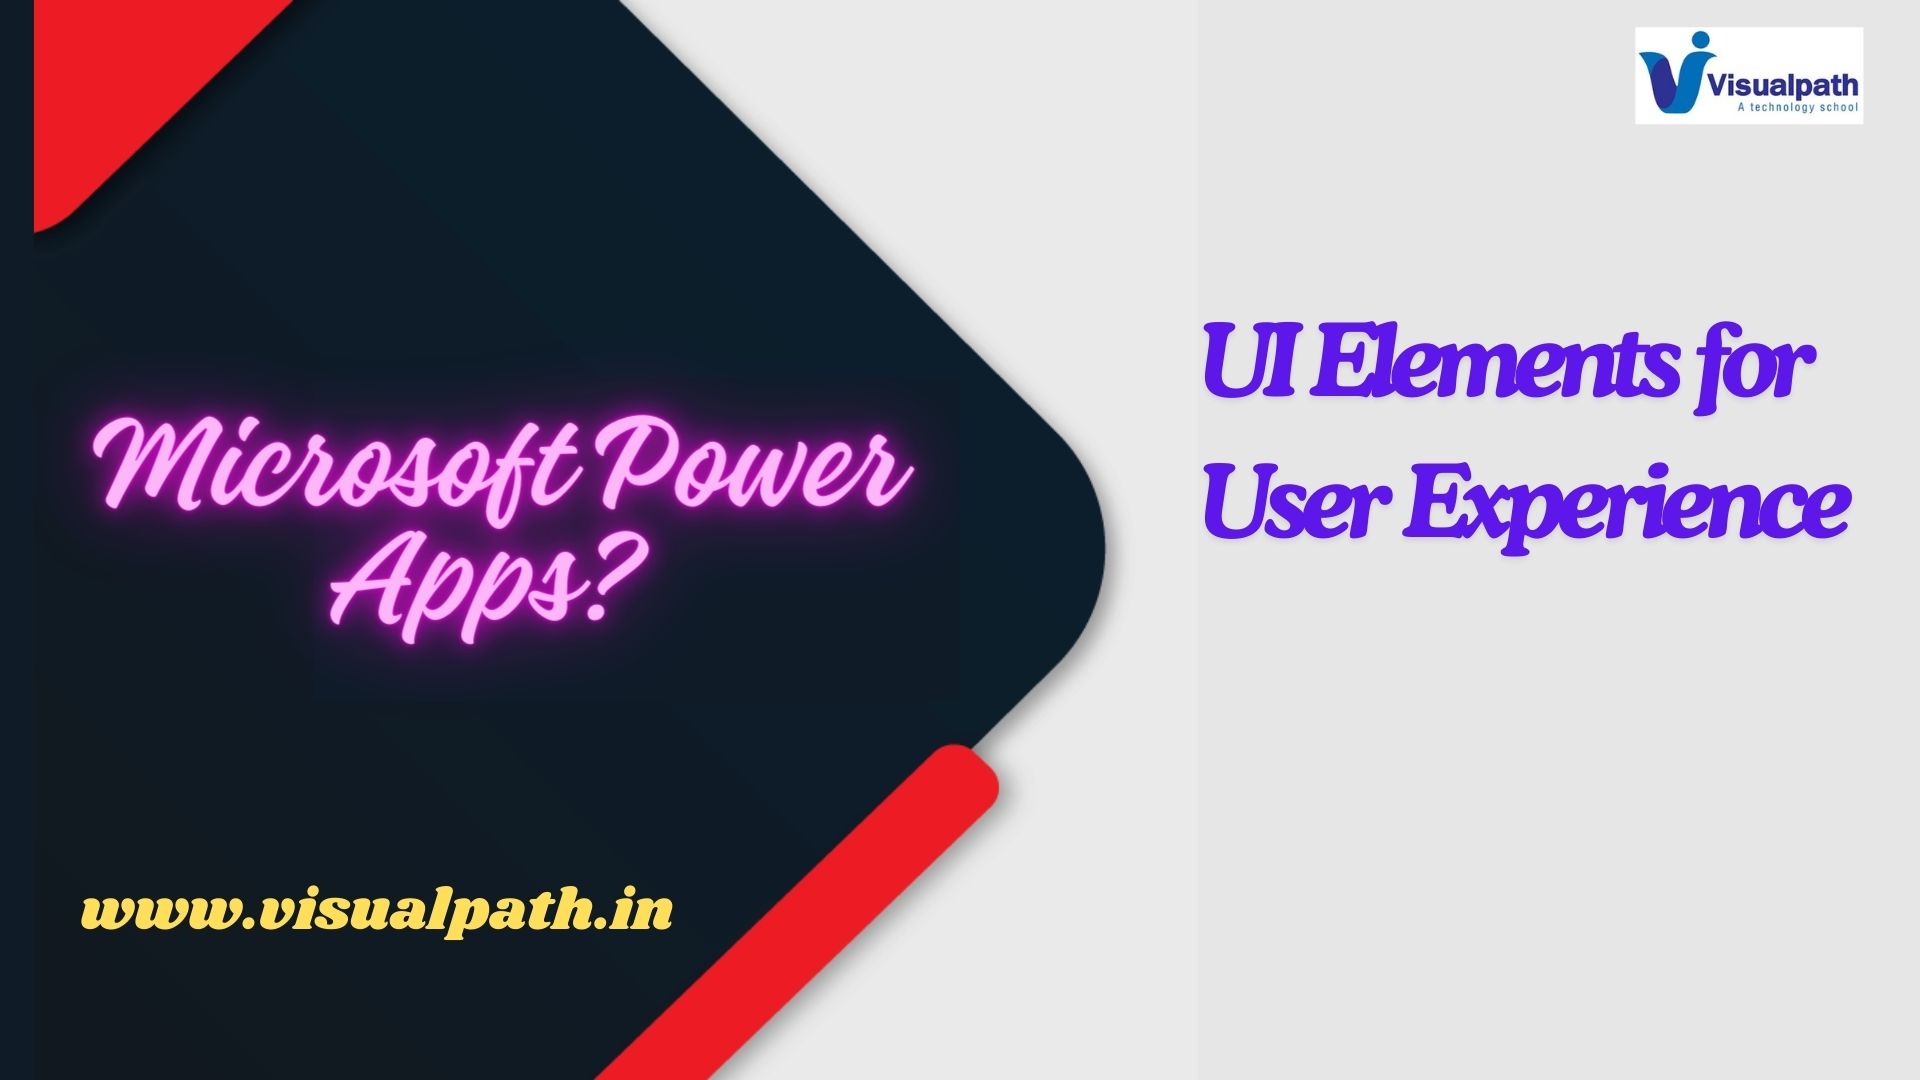 Microsoft Power Apps? Customizing UI Elements for User Experience